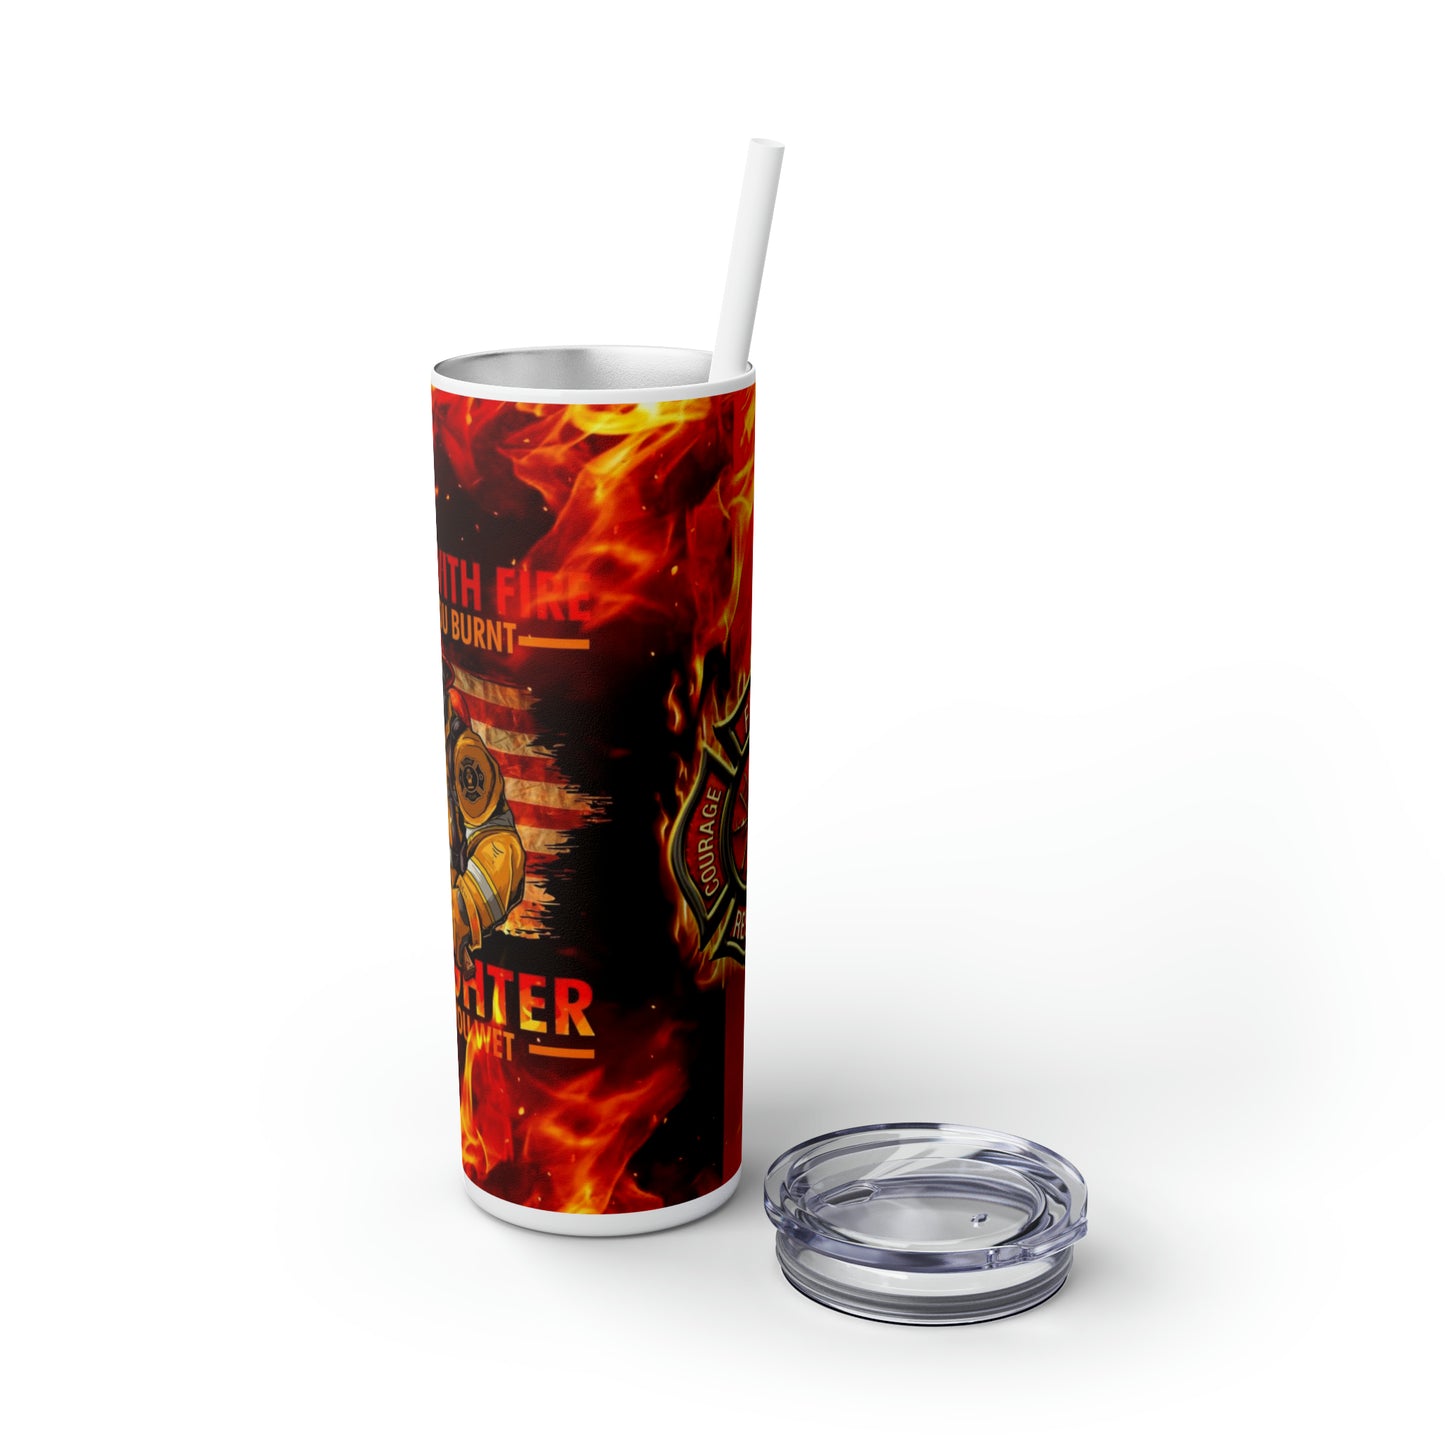 Fire & Rescue Fire Fighter Skinny Tumbler with Straw, 20oz